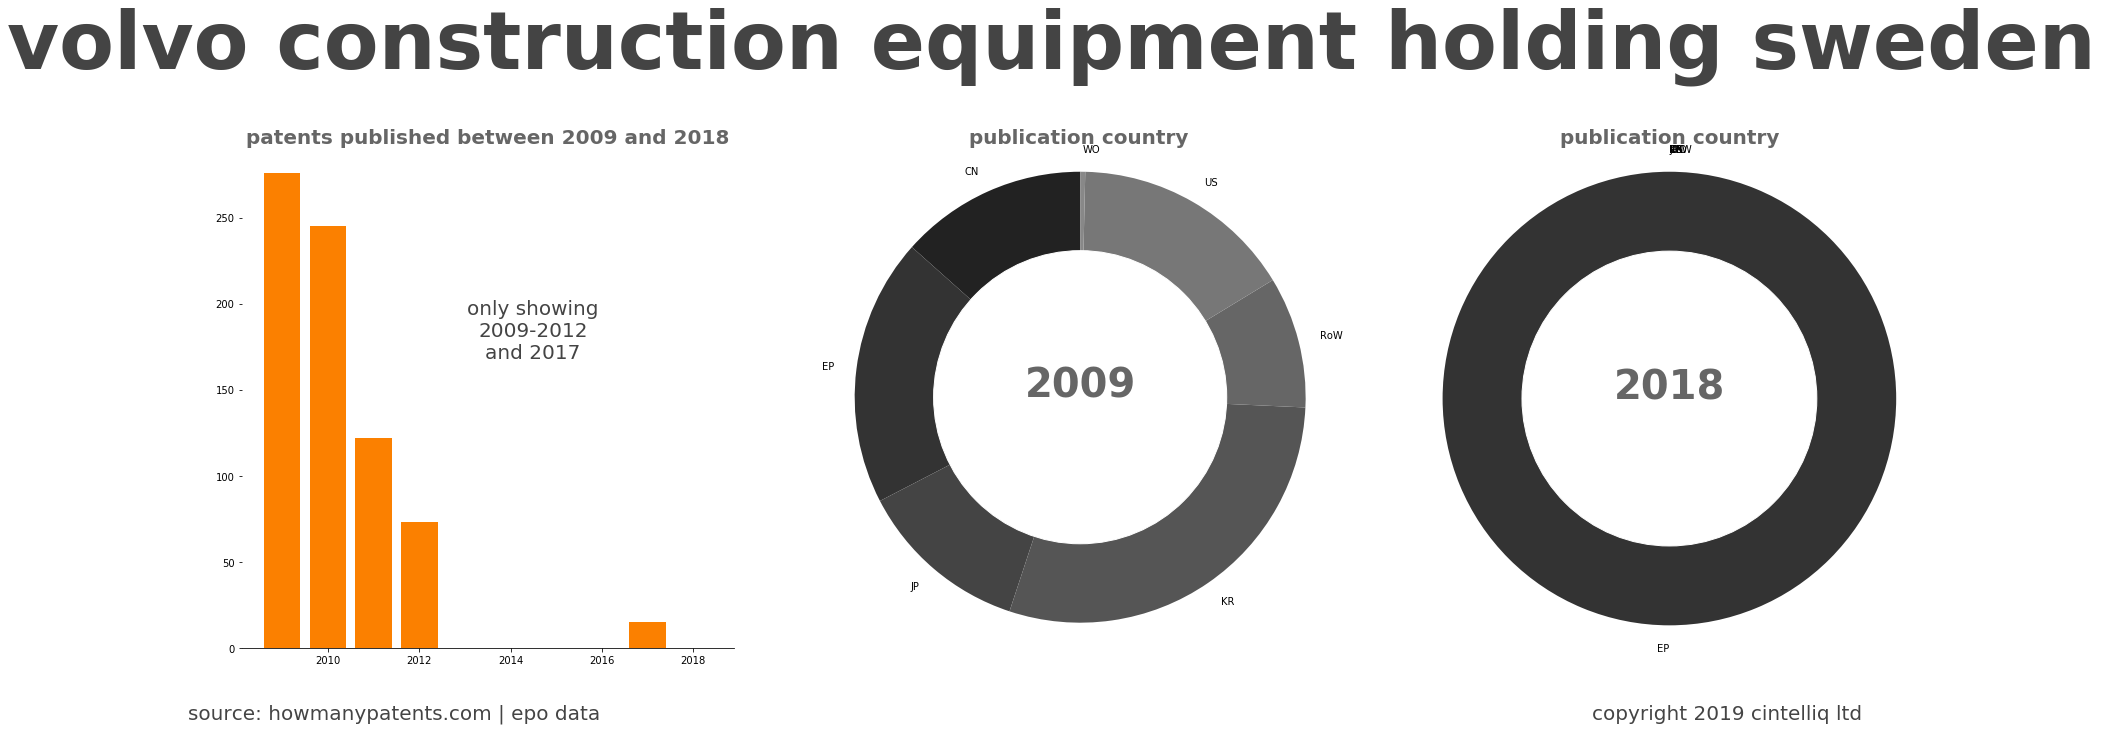 summary of patents for Volvo Construction Equipment Holding Sweden